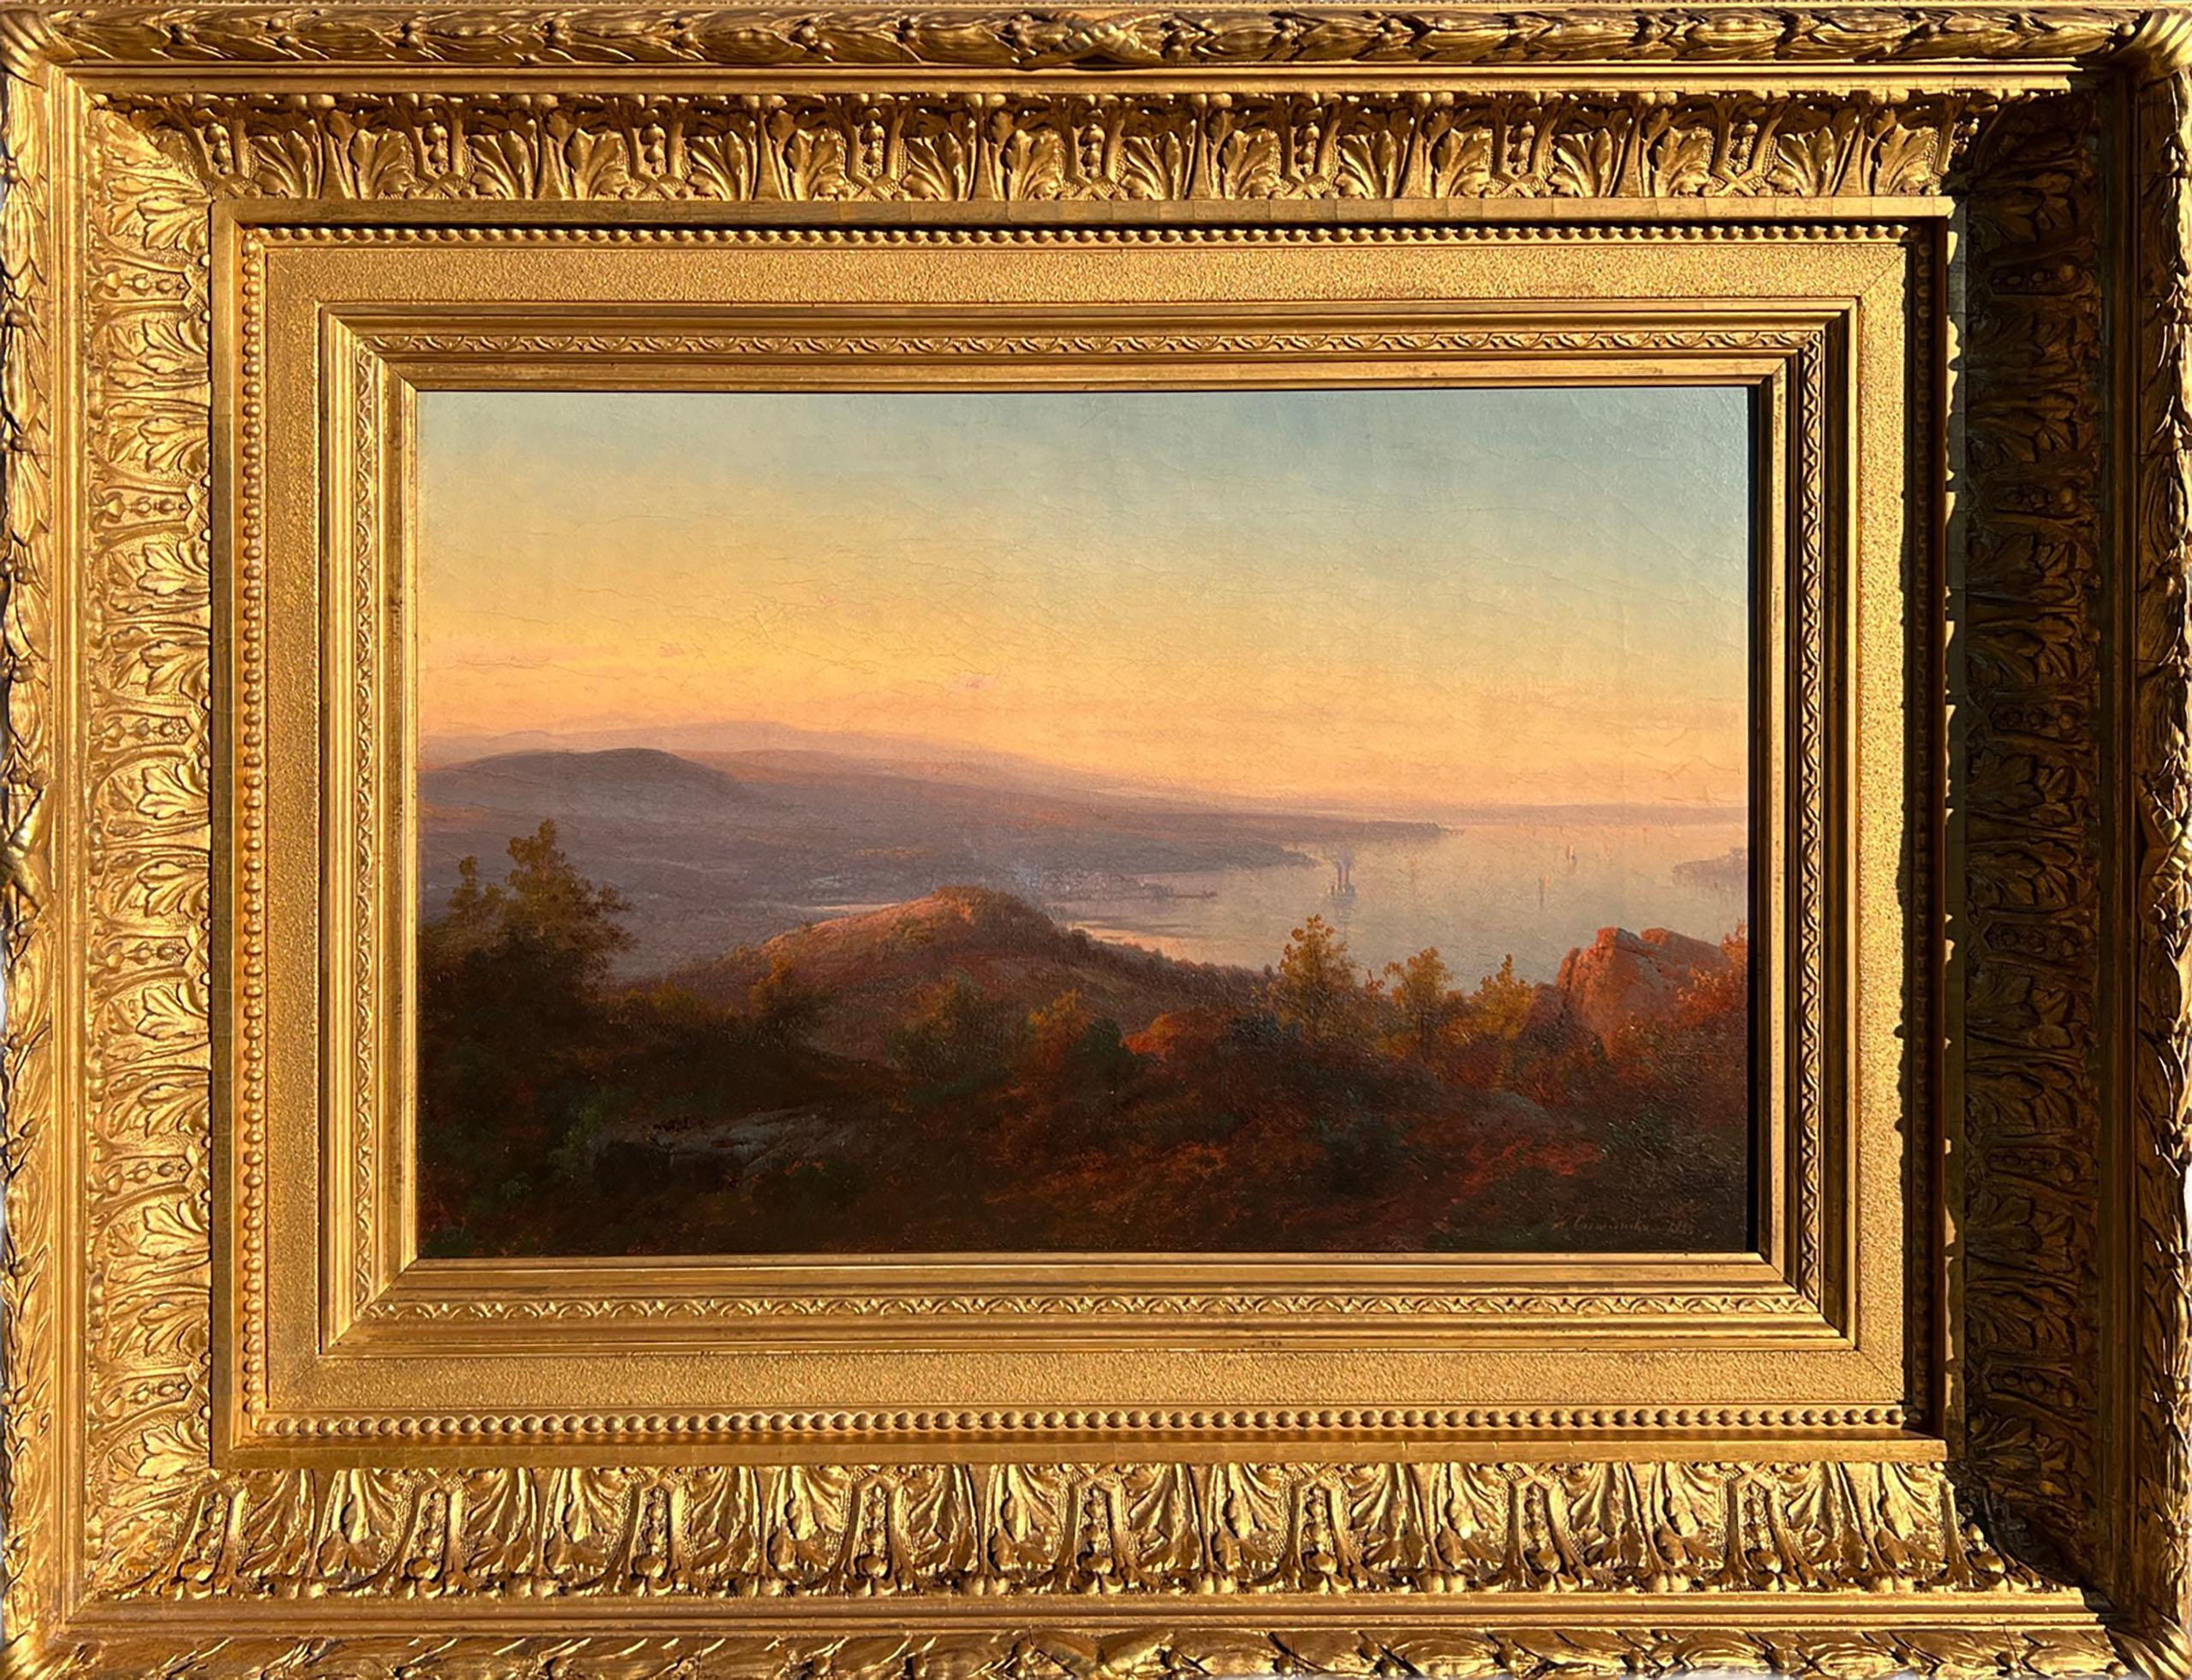 Painted by Hudson River School artist Johann Hermann Carmiencke, "Hudson River Landscape" 1865 is oil on canvas, measures 12 x 18 inches, and is signed and dated 1865 at the lower right. The work is framed in an elegant, period appropriate frame and